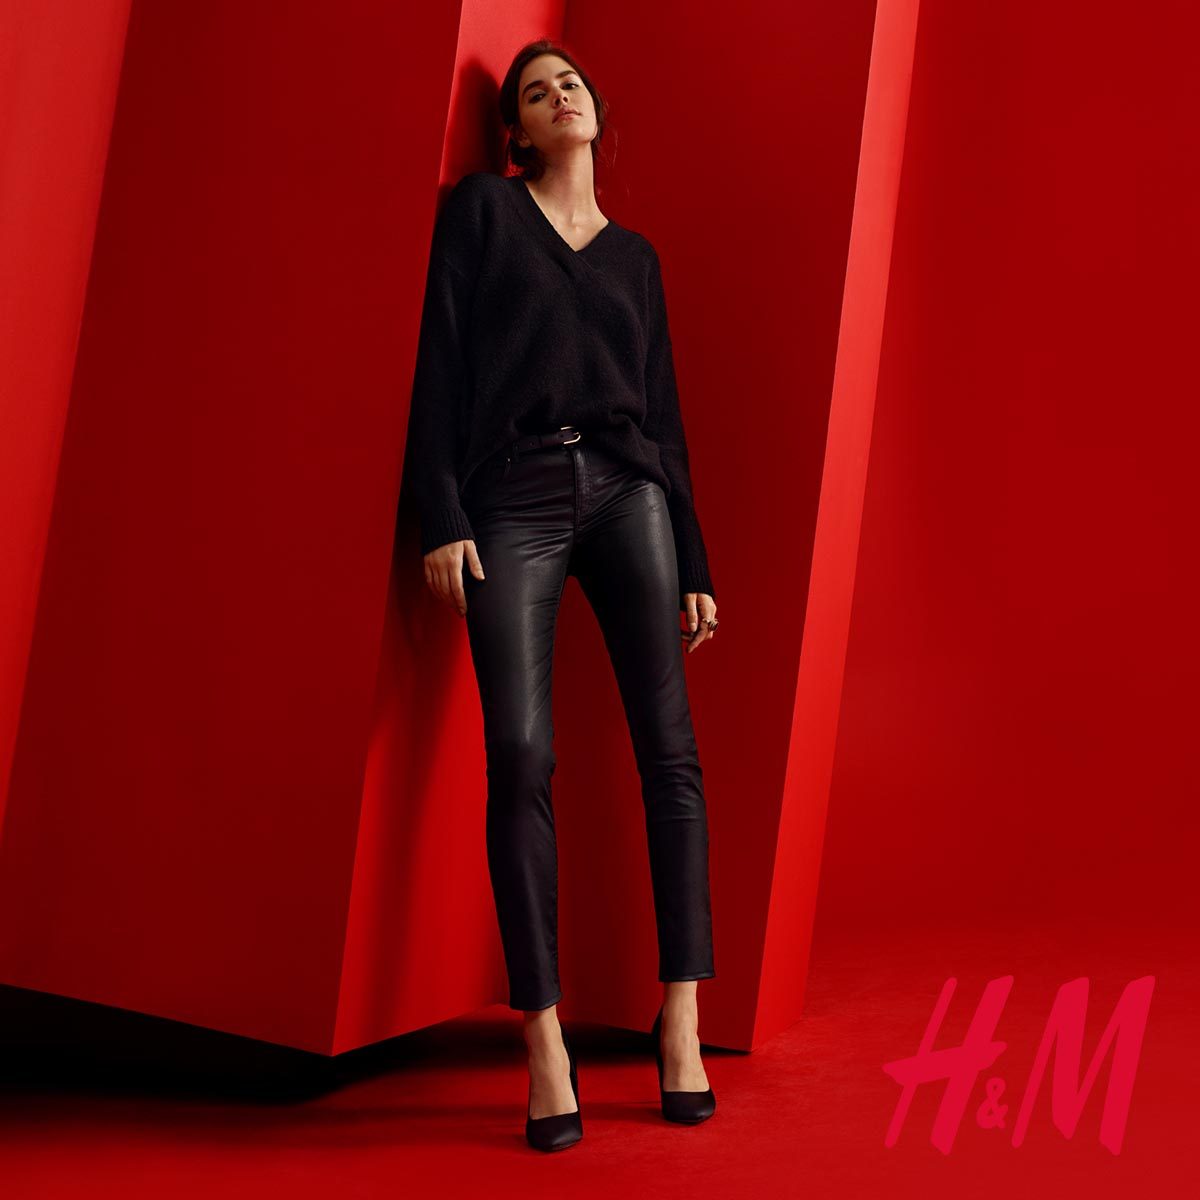 H&M’s Black Friday Sale: Up to 70% off on their new collection and more items